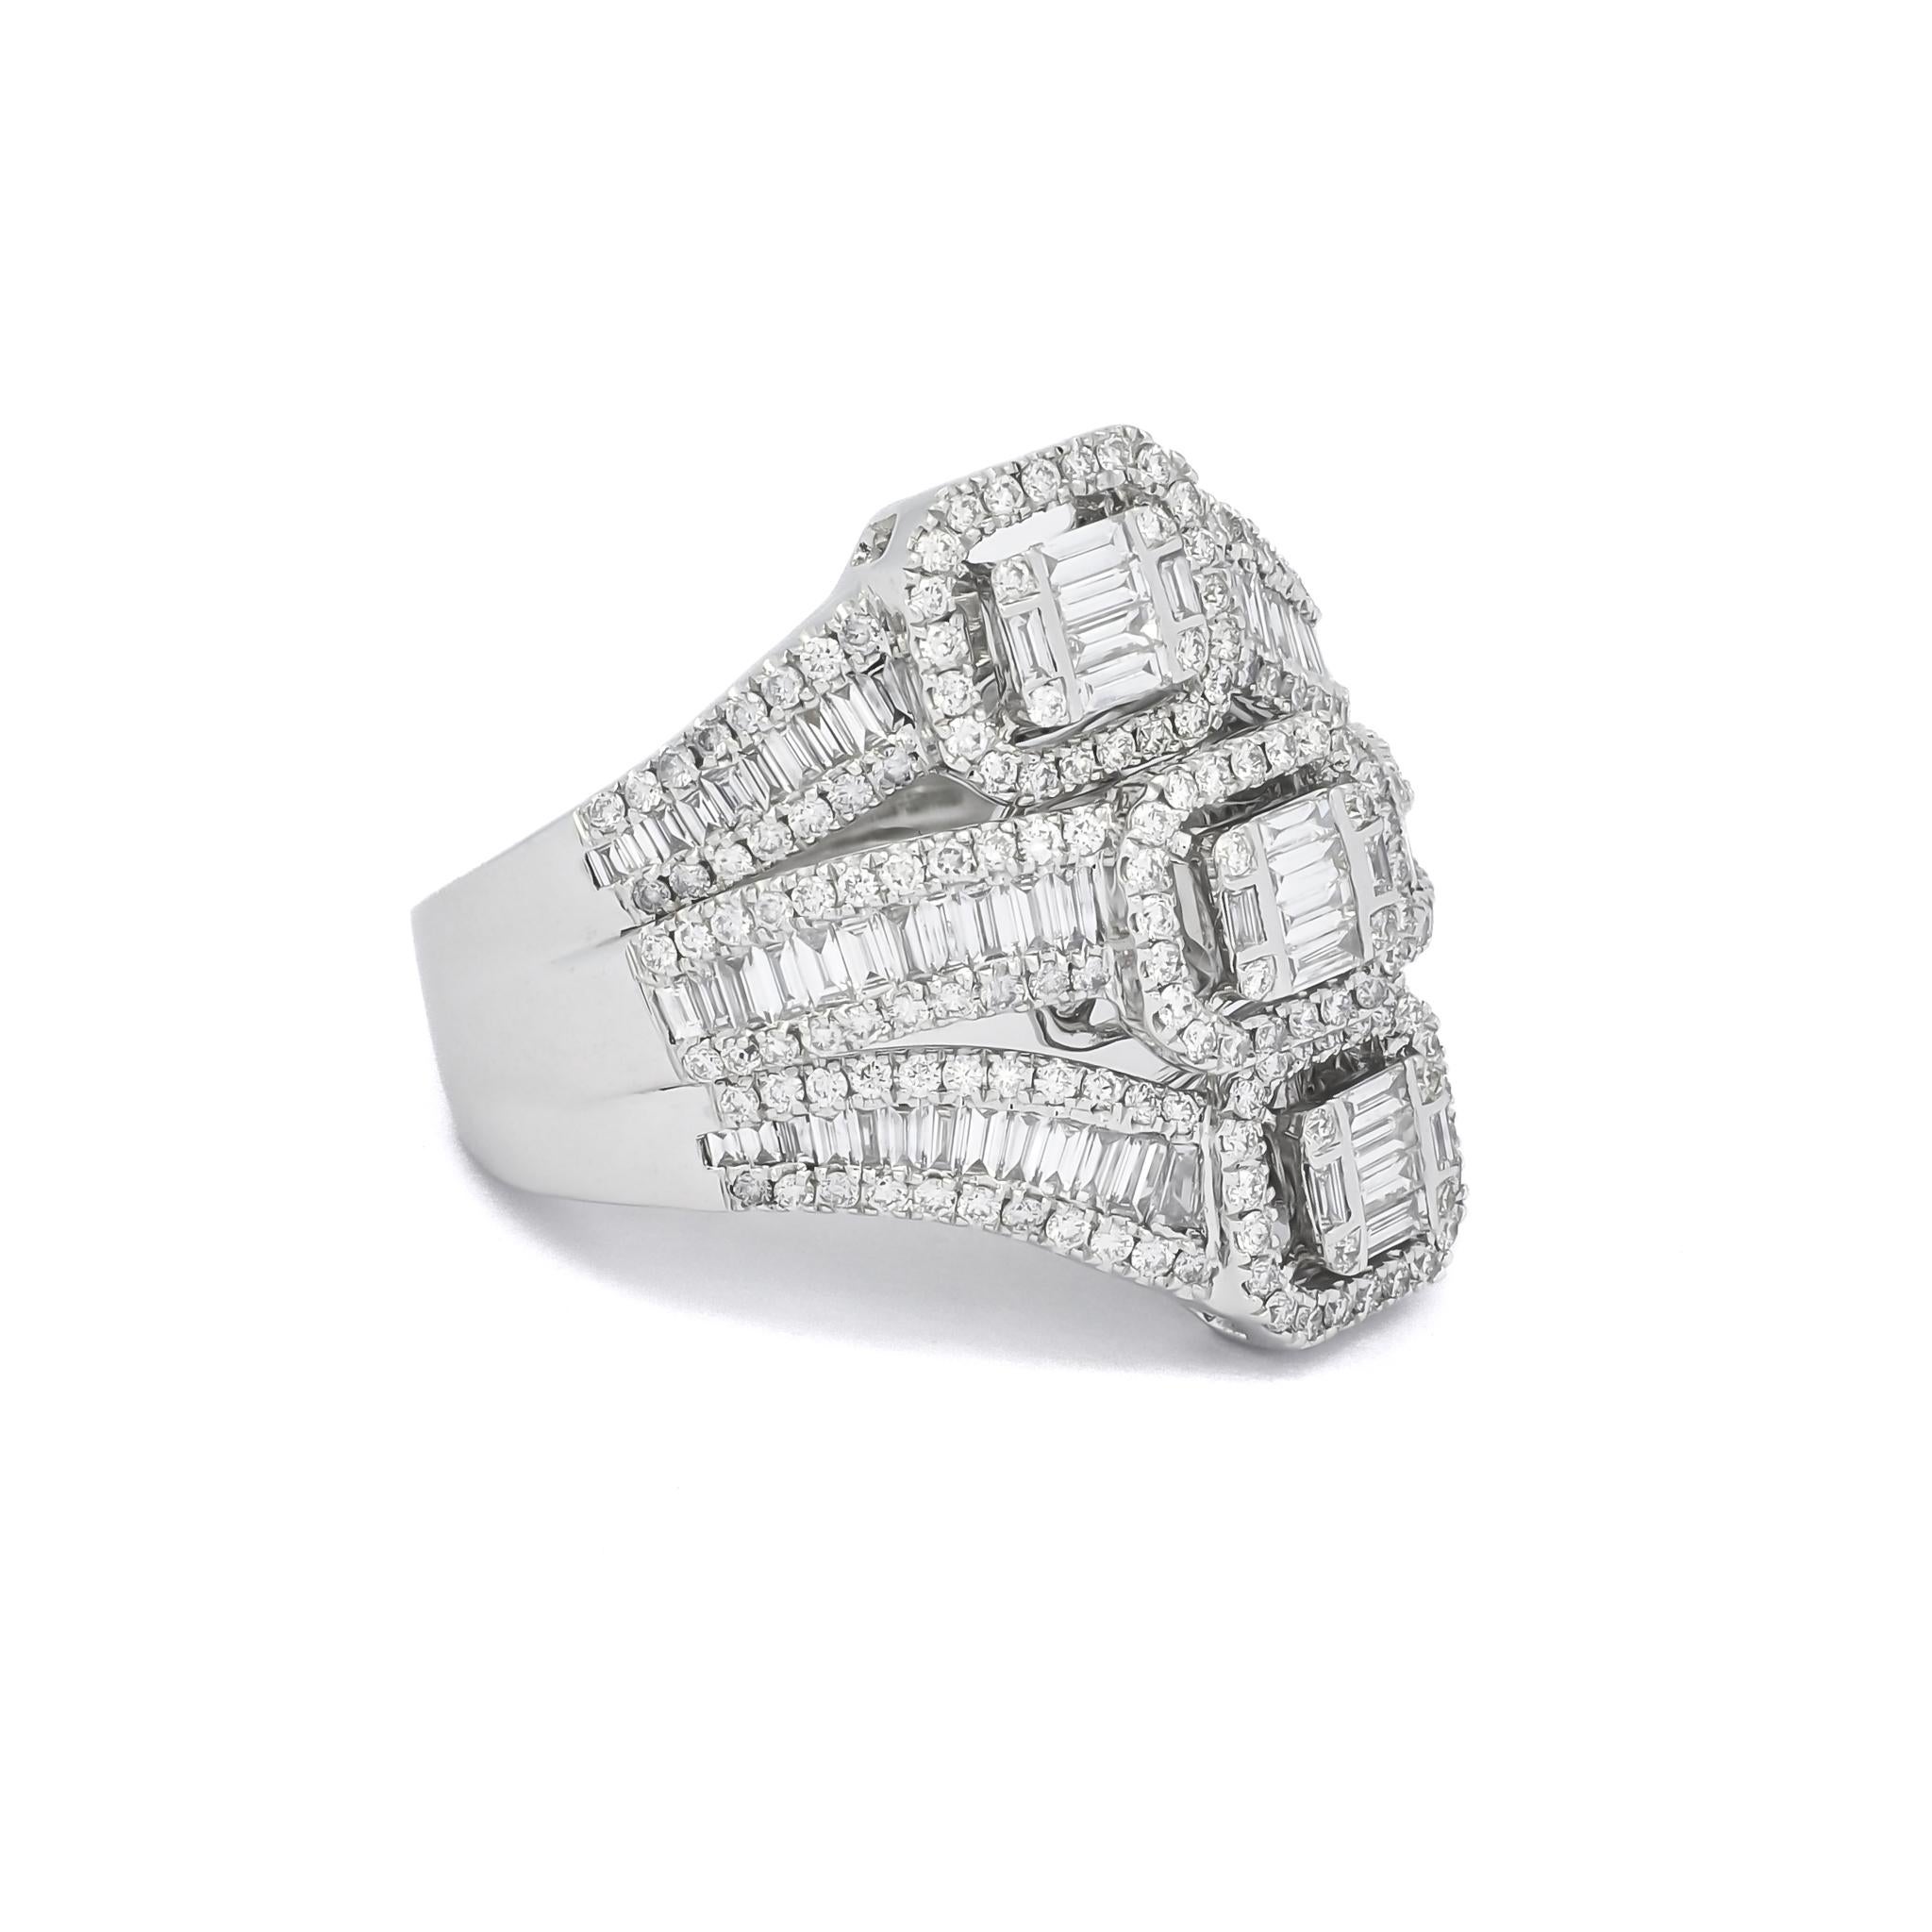 A trio of white gold baguette clusters are combined with a halo, highlighting on the side with accented baguette diamond shank. 
The Three Diamond Cluster Ring is a stunning statement piece, perfect for adding a touch of luxury and sophistication to